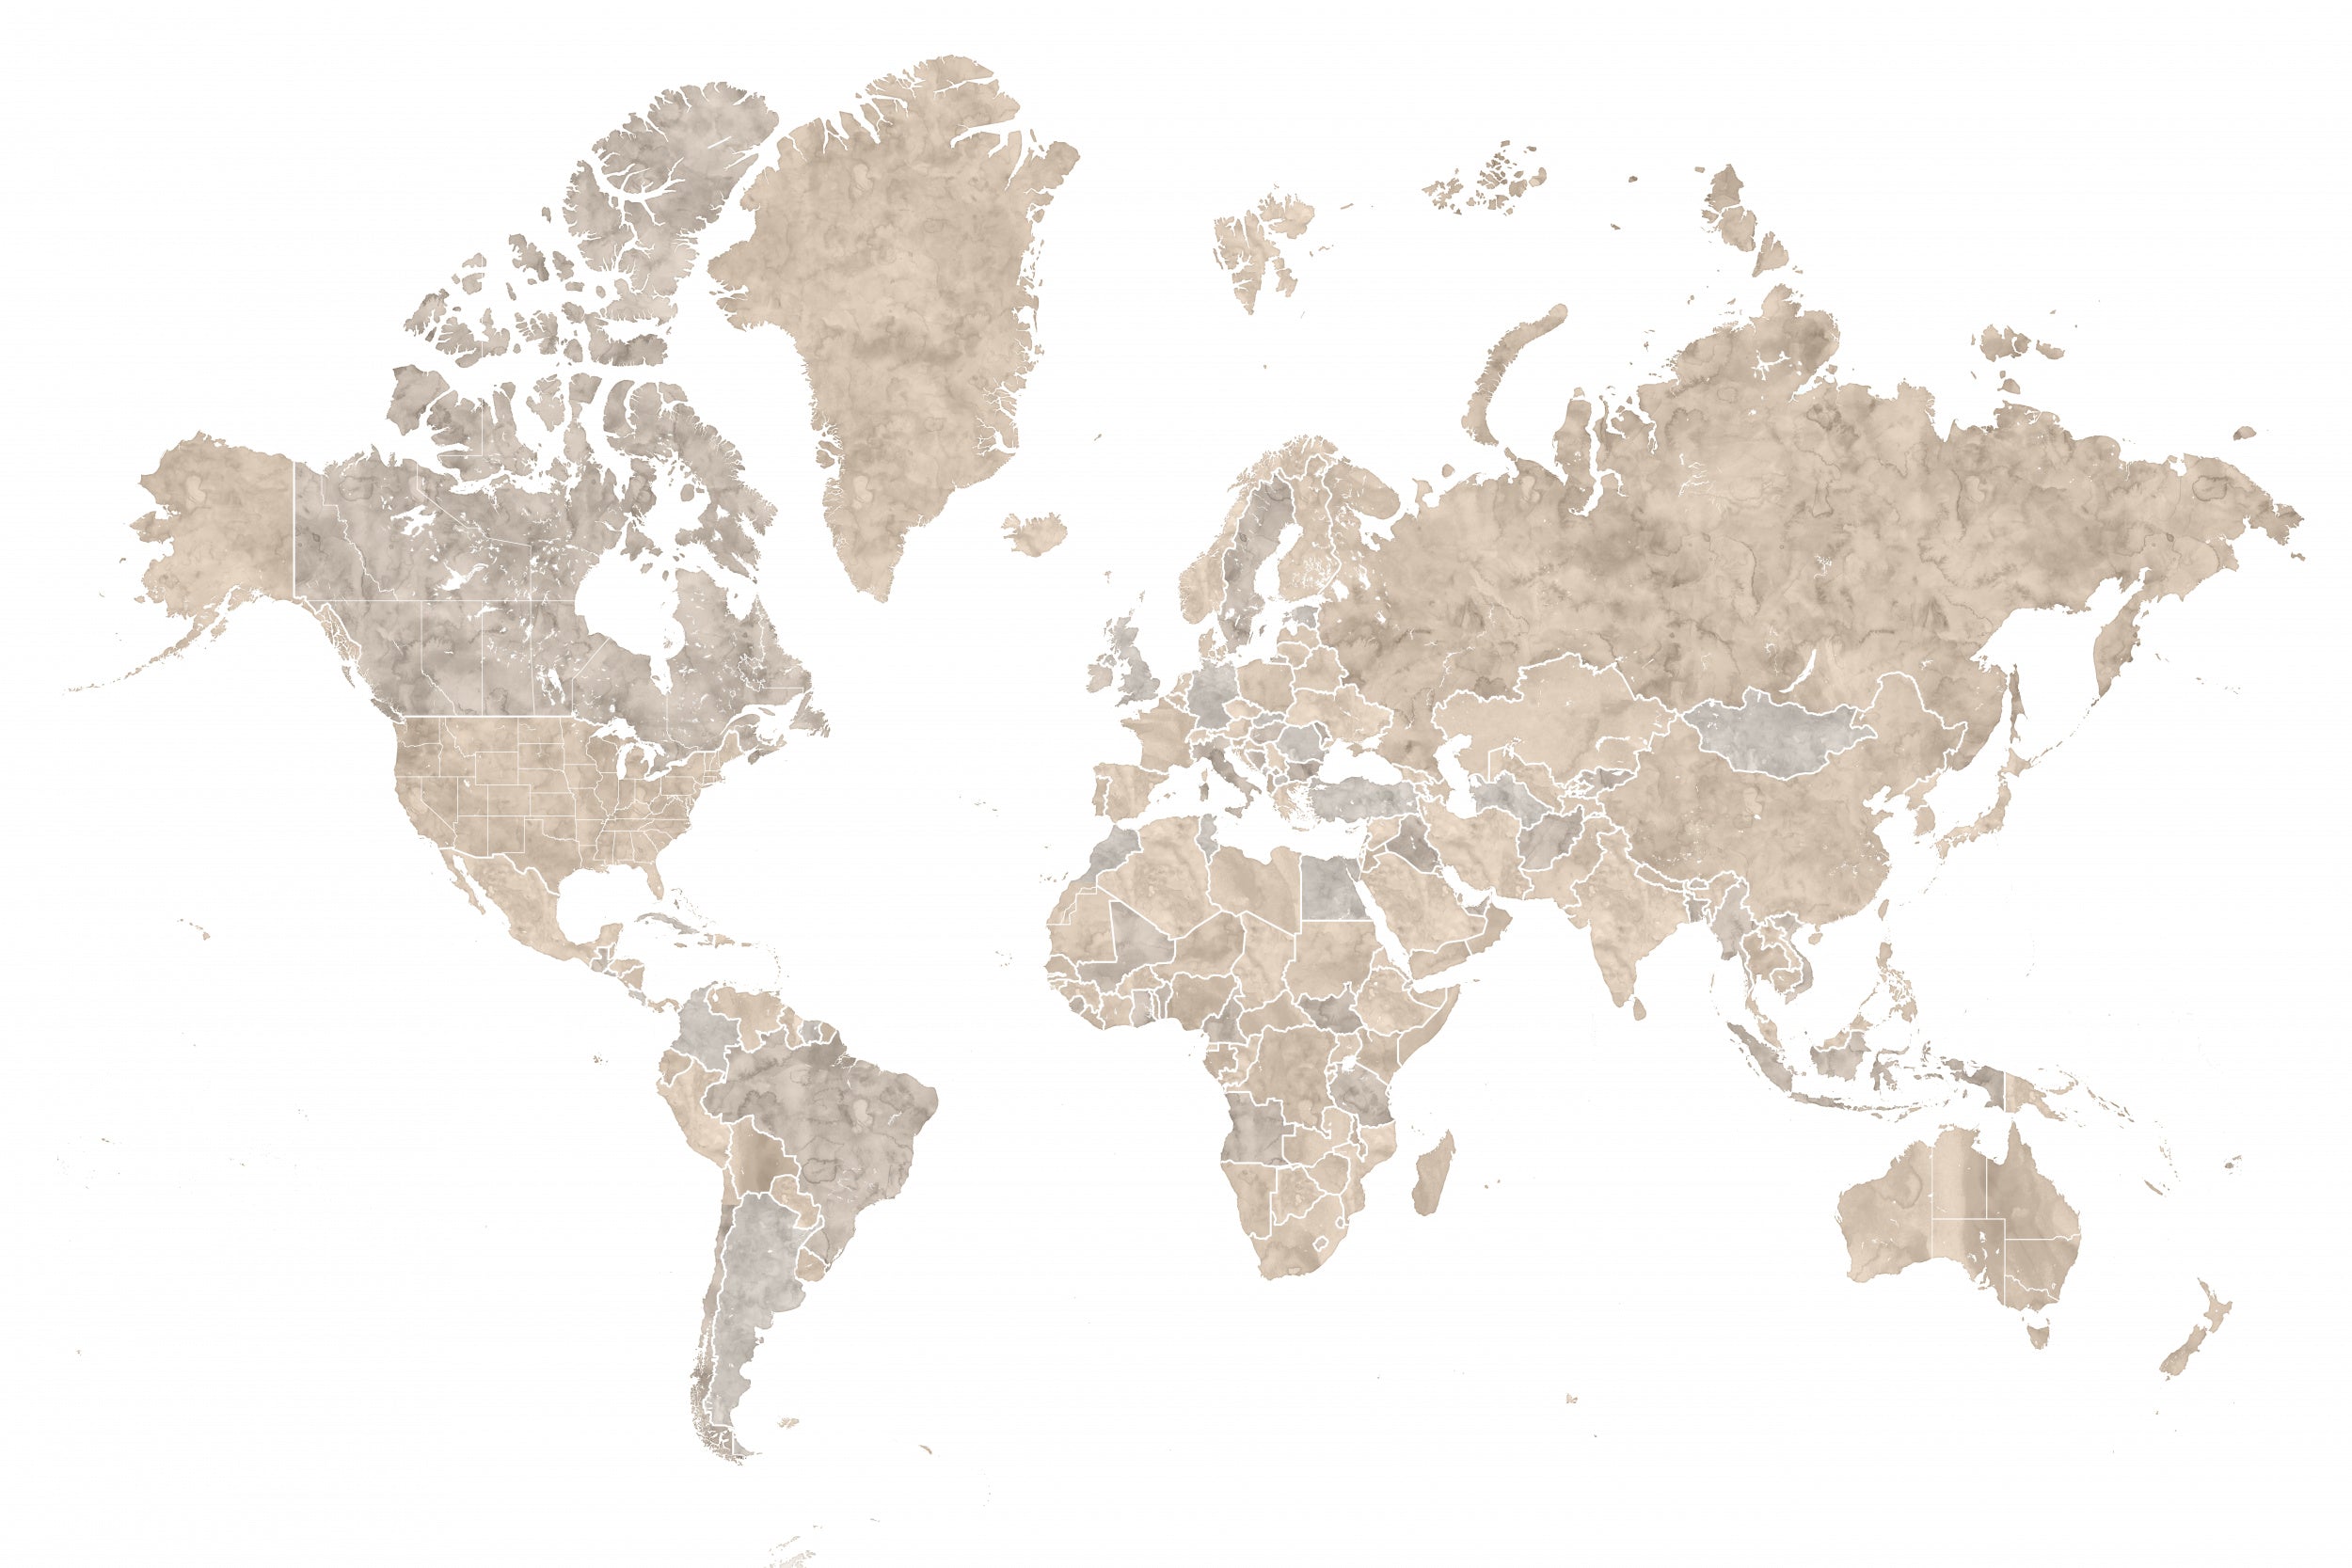 Abey world map no labels